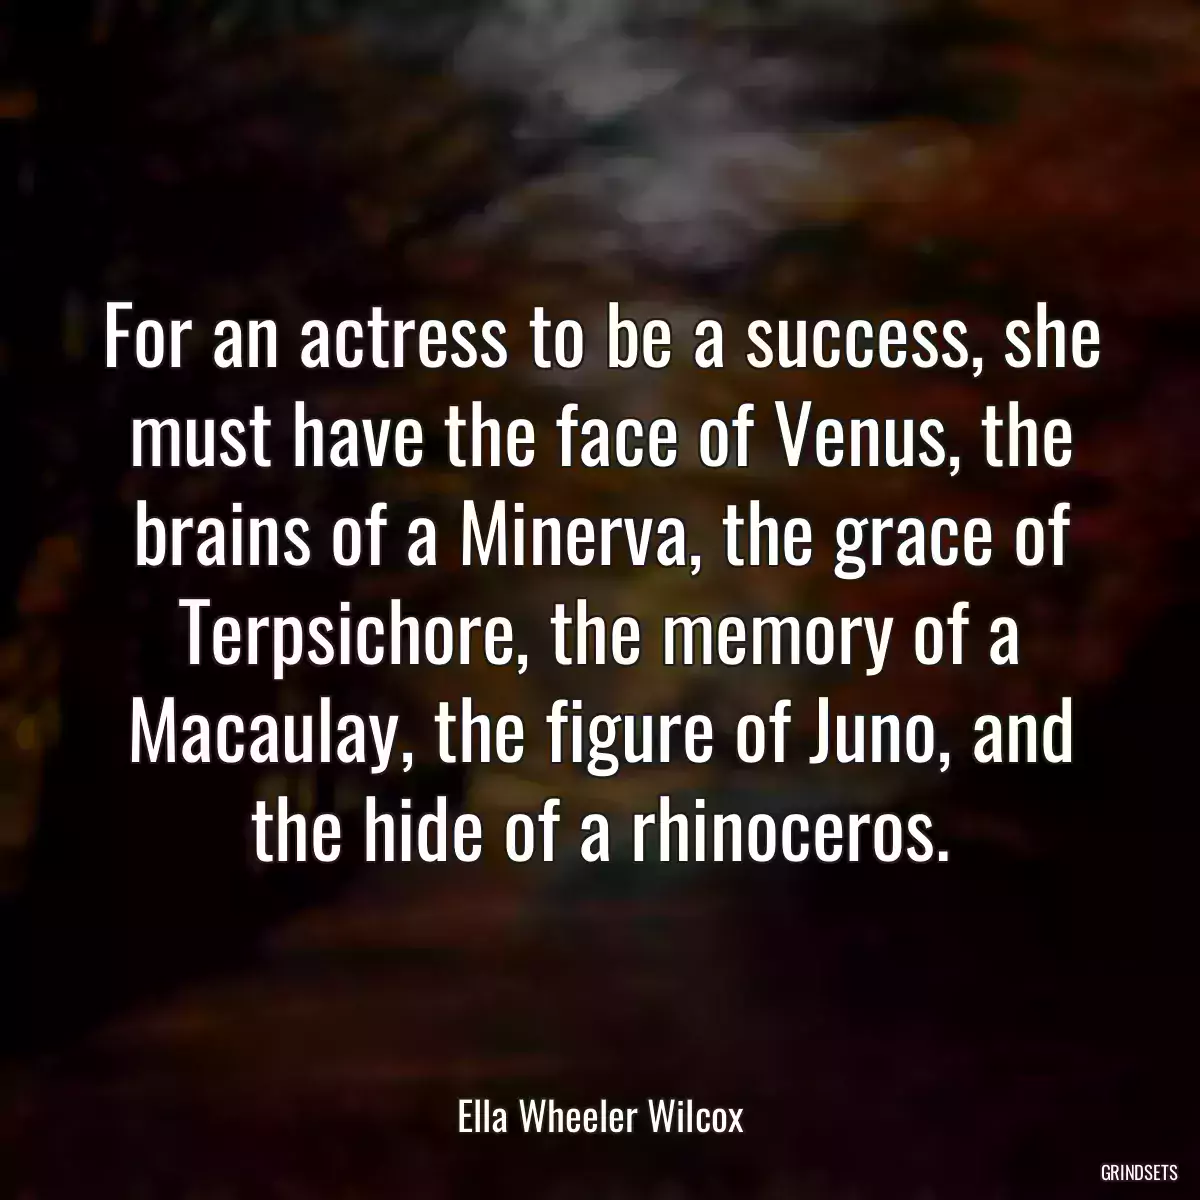 For an actress to be a success, she must have the face of Venus, the brains of a Minerva, the grace of Terpsichore, the memory of a Macaulay, the figure of Juno, and the hide of a rhinoceros.